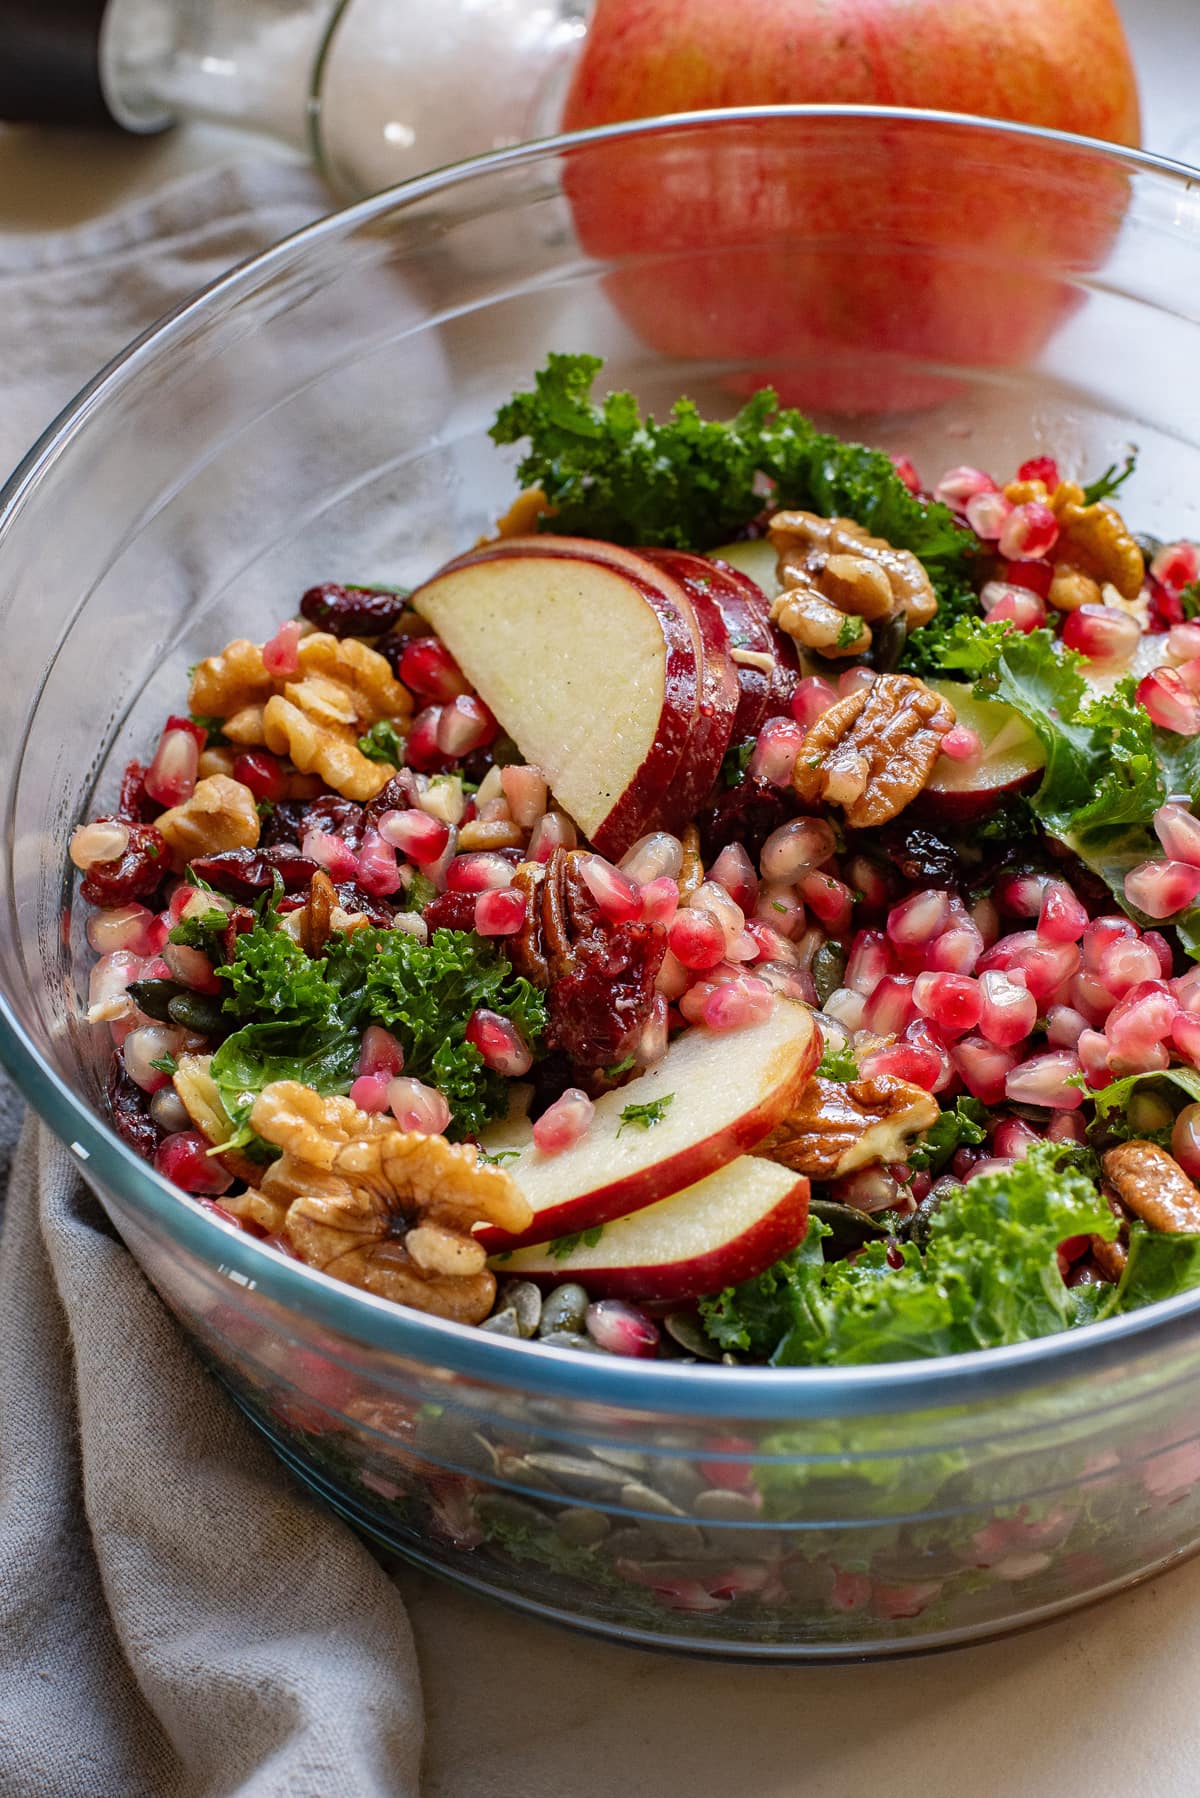 Pomegranate salad in a clear bowl.